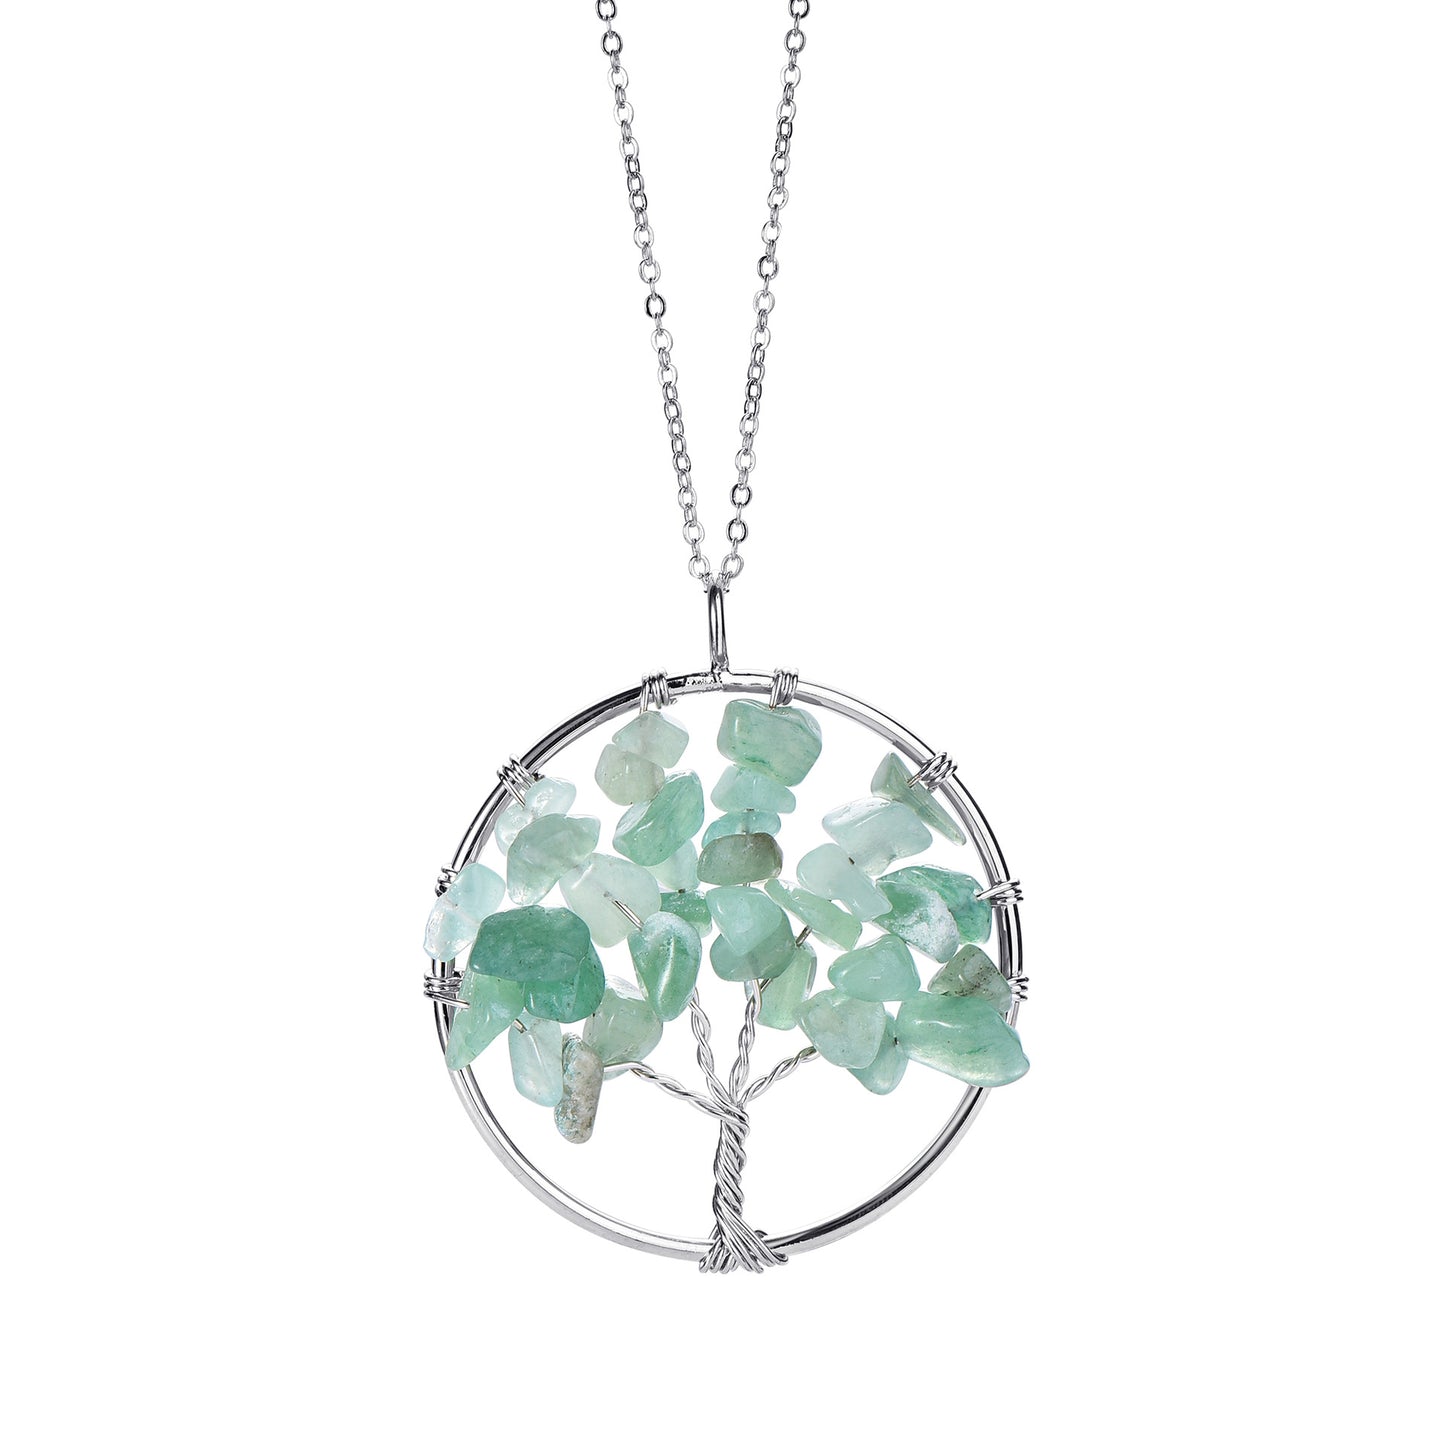 A Tree of Life Pendant - Lucky Jewelry necklace with different colored stones by Maramalive™.